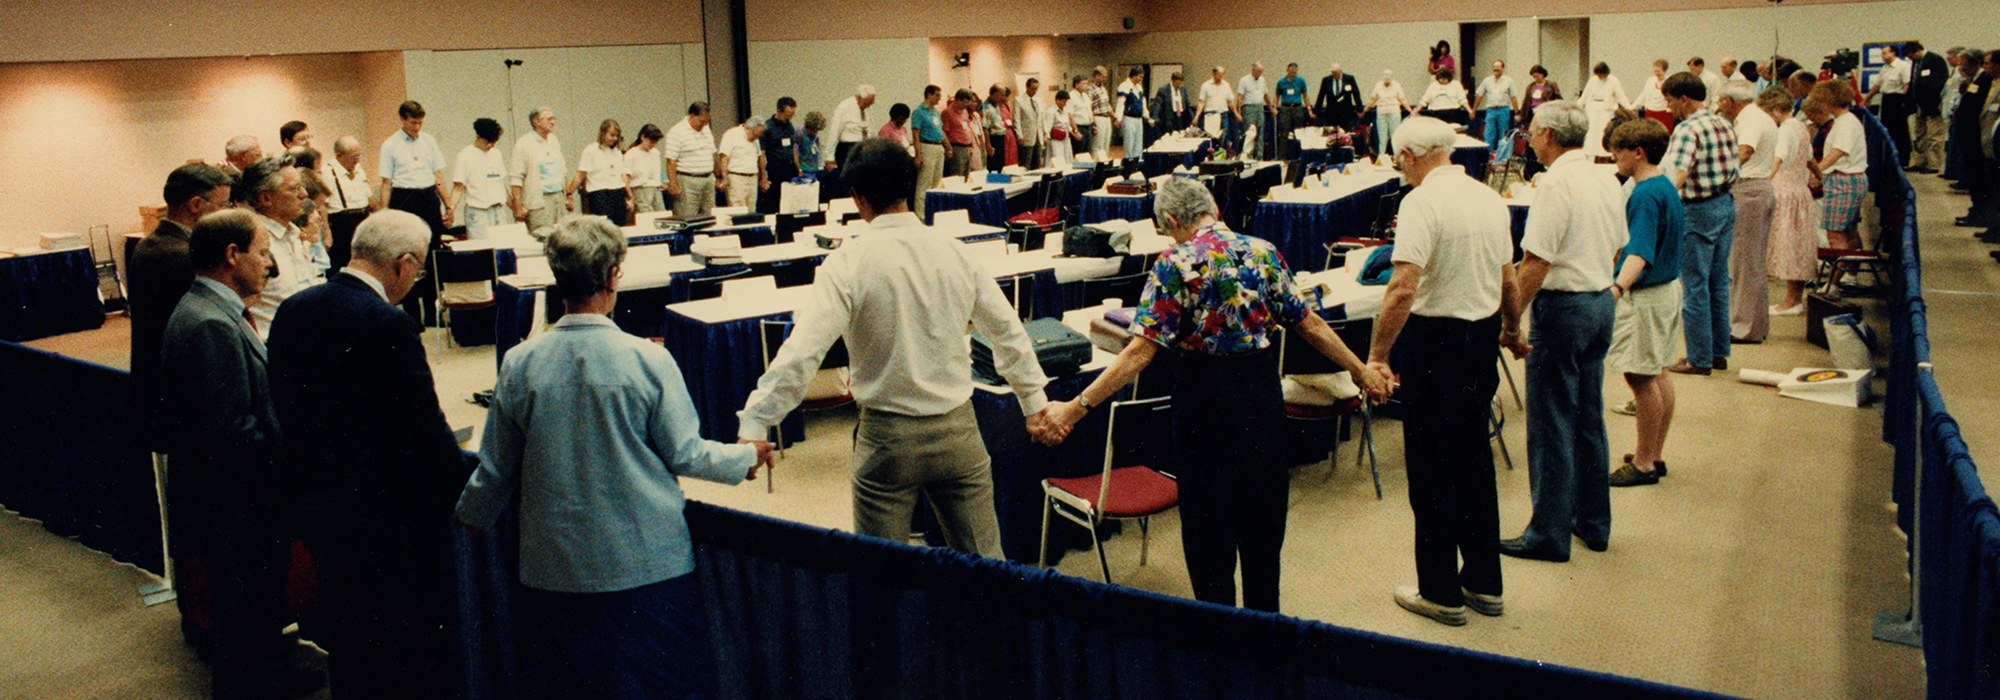 “Human Sexuality Committee at the 203rd General Assembly, Baltimore, Maryland, 1991. Via PHS Pearl online archives.”